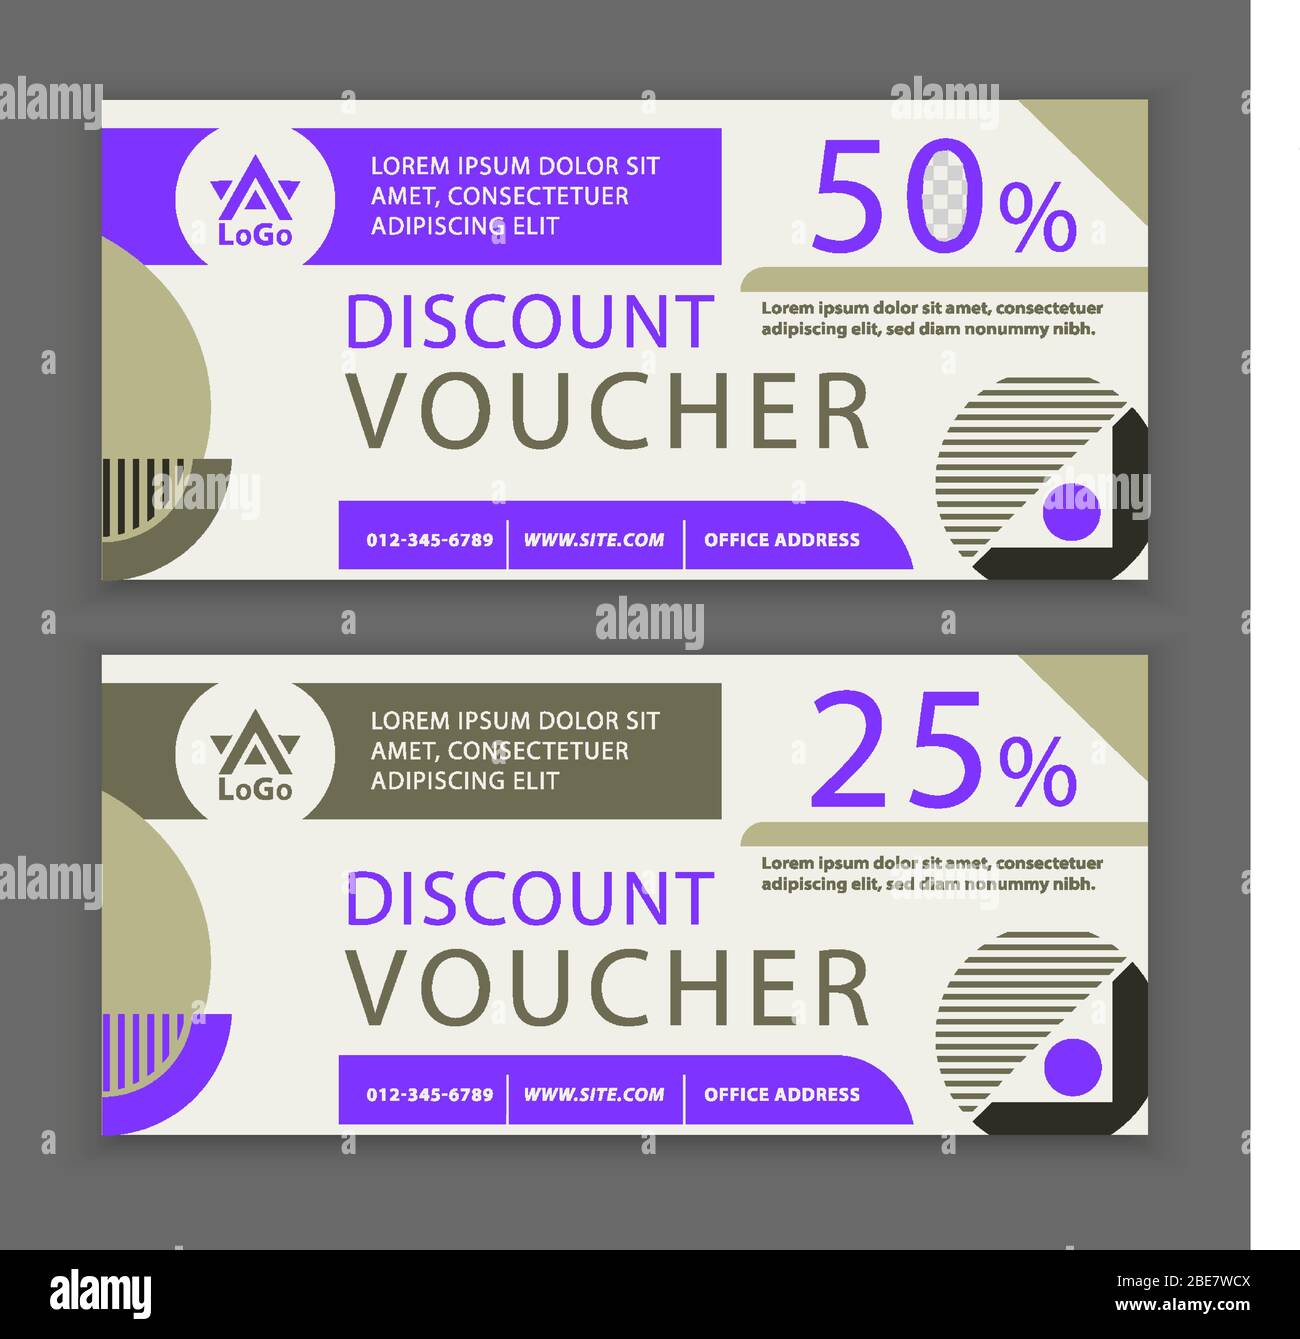 Geometry voucher template. Universal white flyer for business. Clean design for department stores, business. Geometry shapes with textures Stock Vector